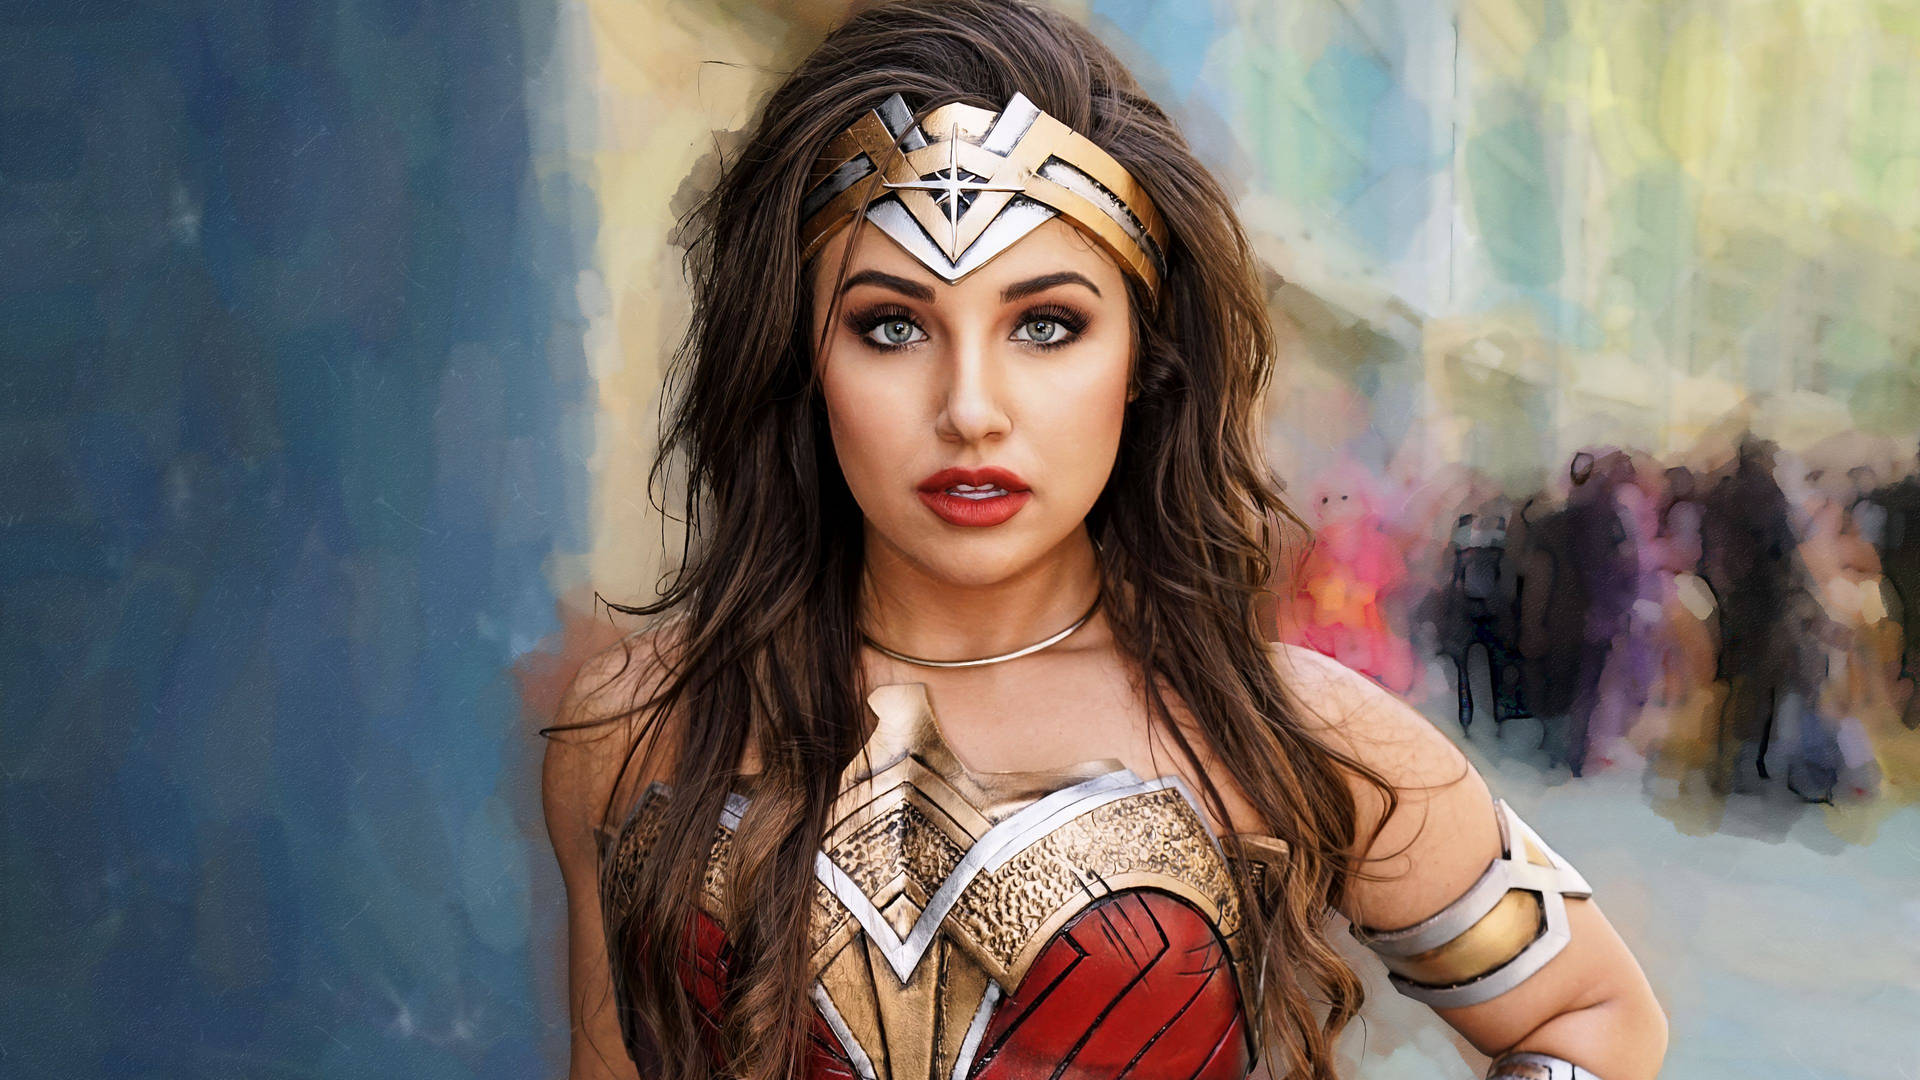 Mature Woman In A Wonder Woman Costume Background